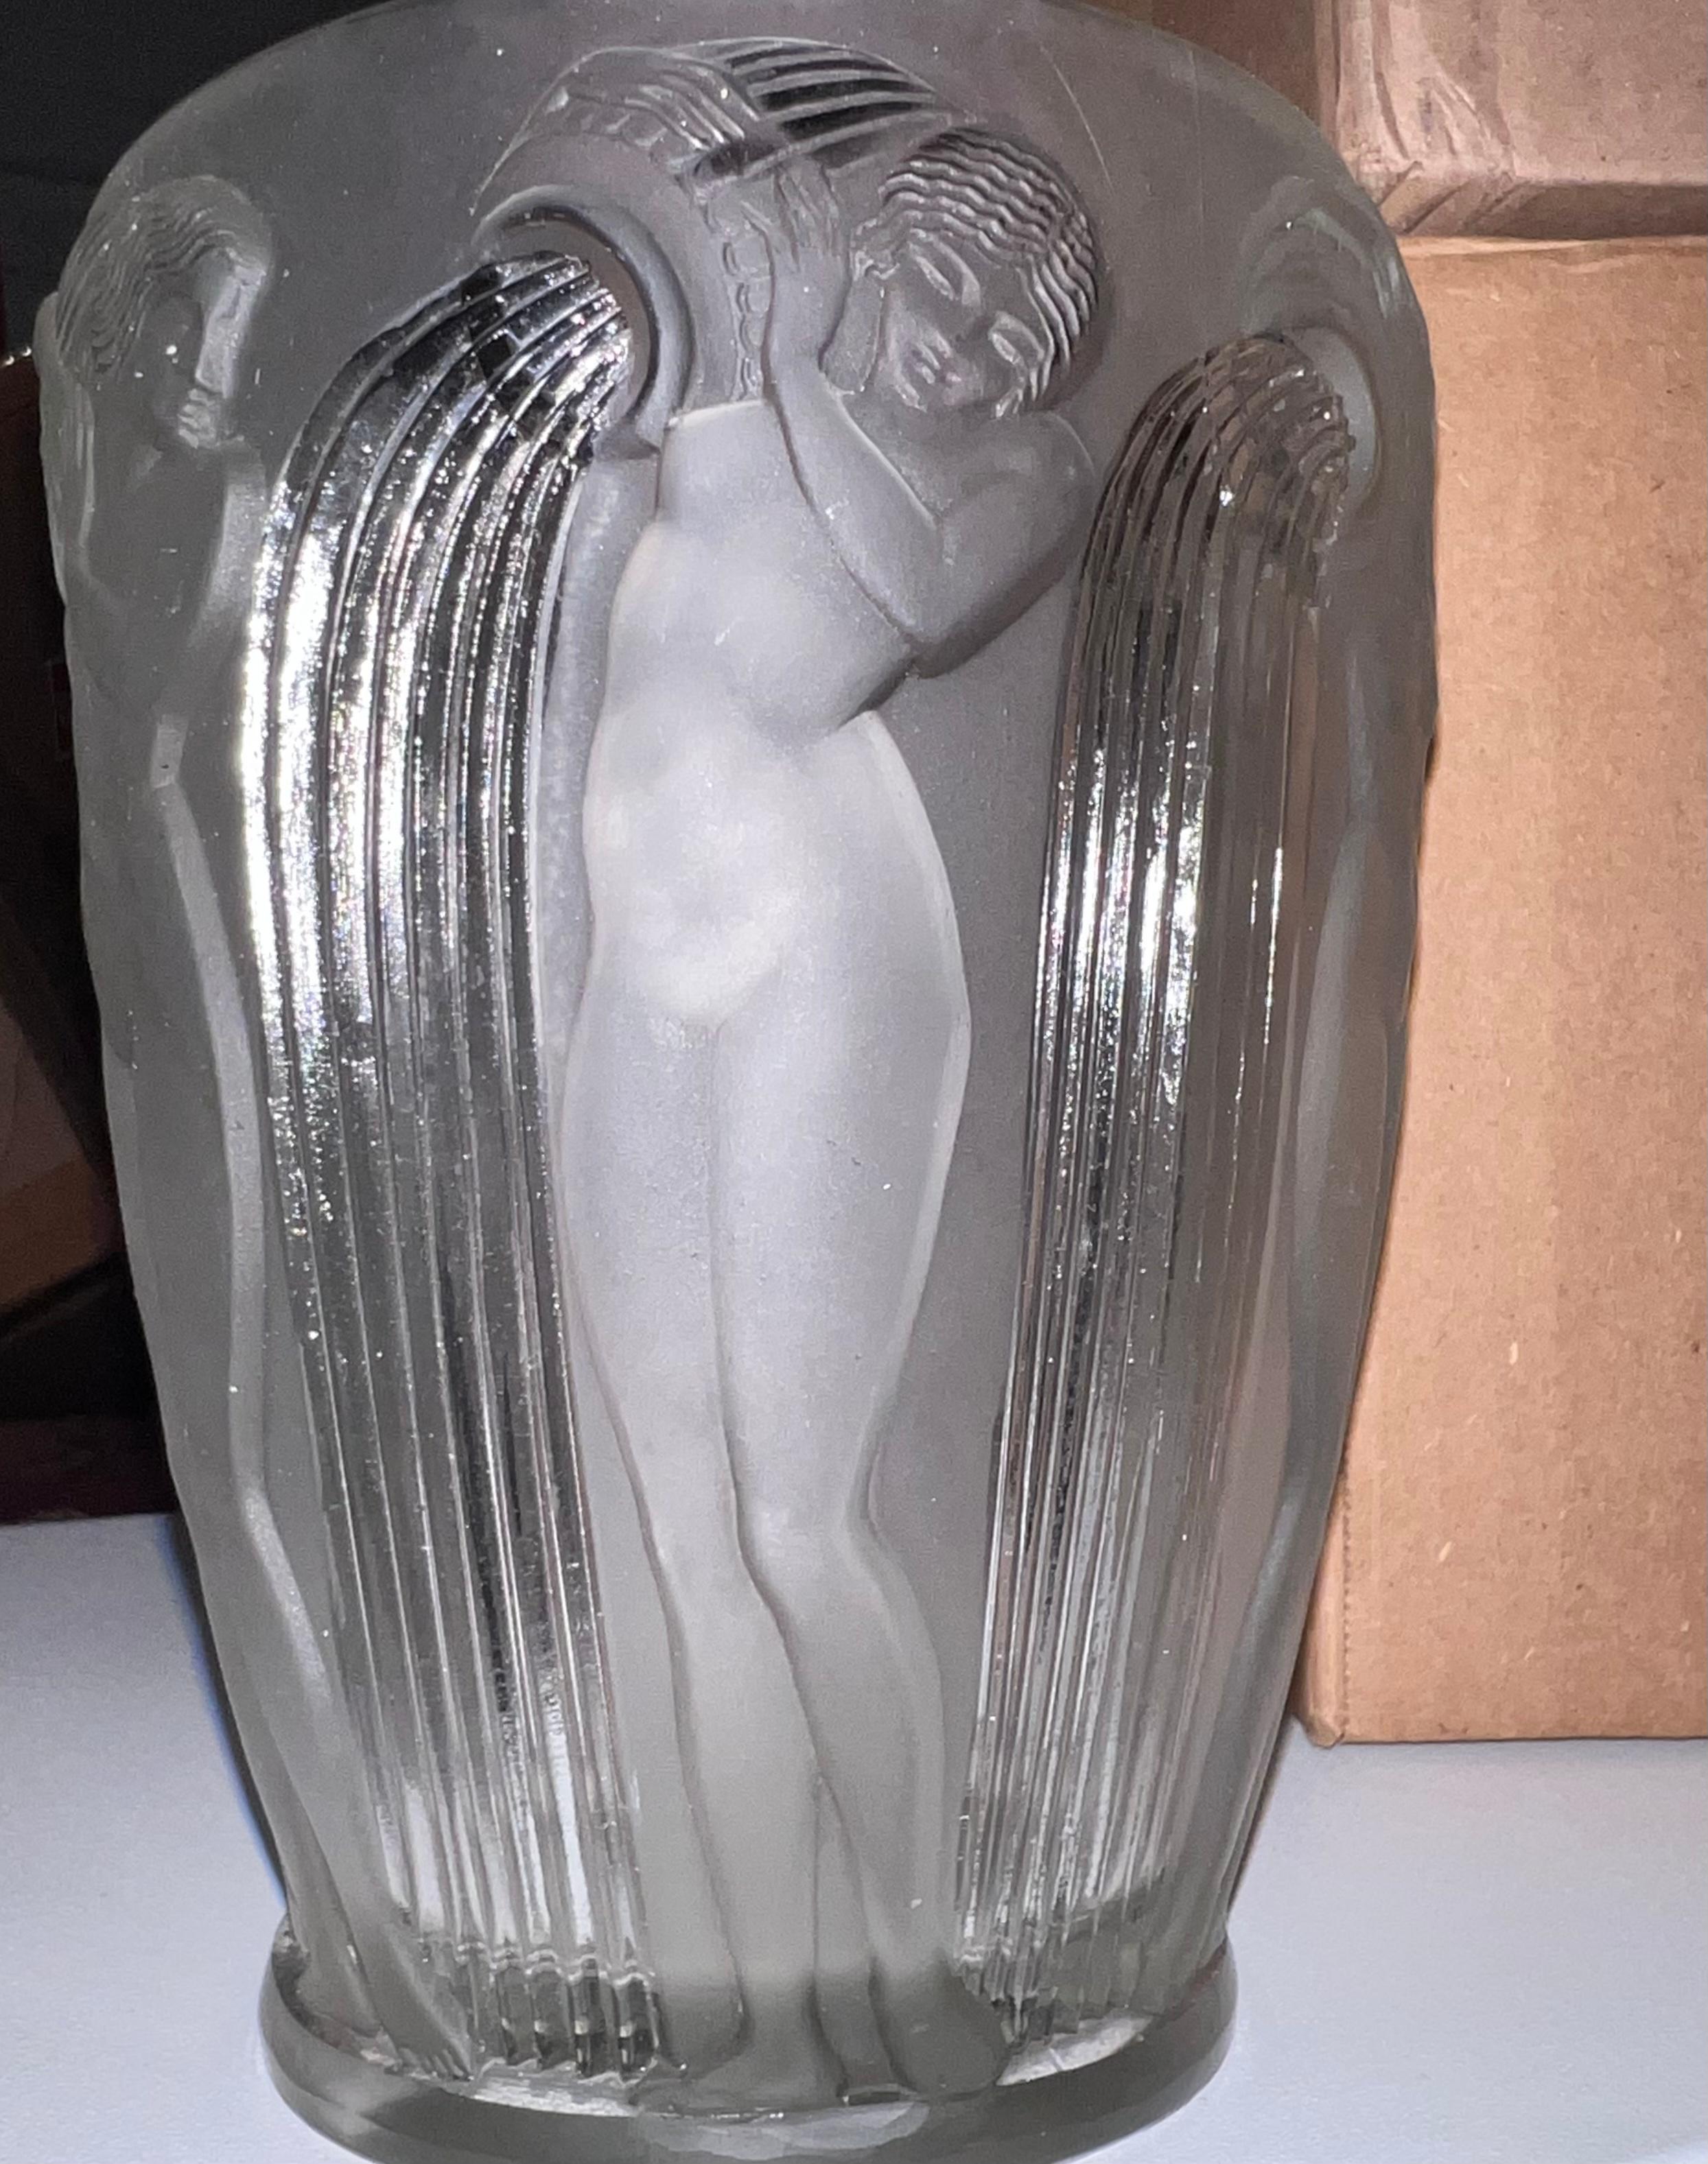 Rene Lalique clear and frosted glass 'Danaides' vase. This pattern features the Daughters of Danaus stood pouring water from a vessel. Molded makers mark, 'R. LALIQUE', to the underside. Book reference: 'R. LALIQUE Catalogue Raisonné De L'Oeuvre De